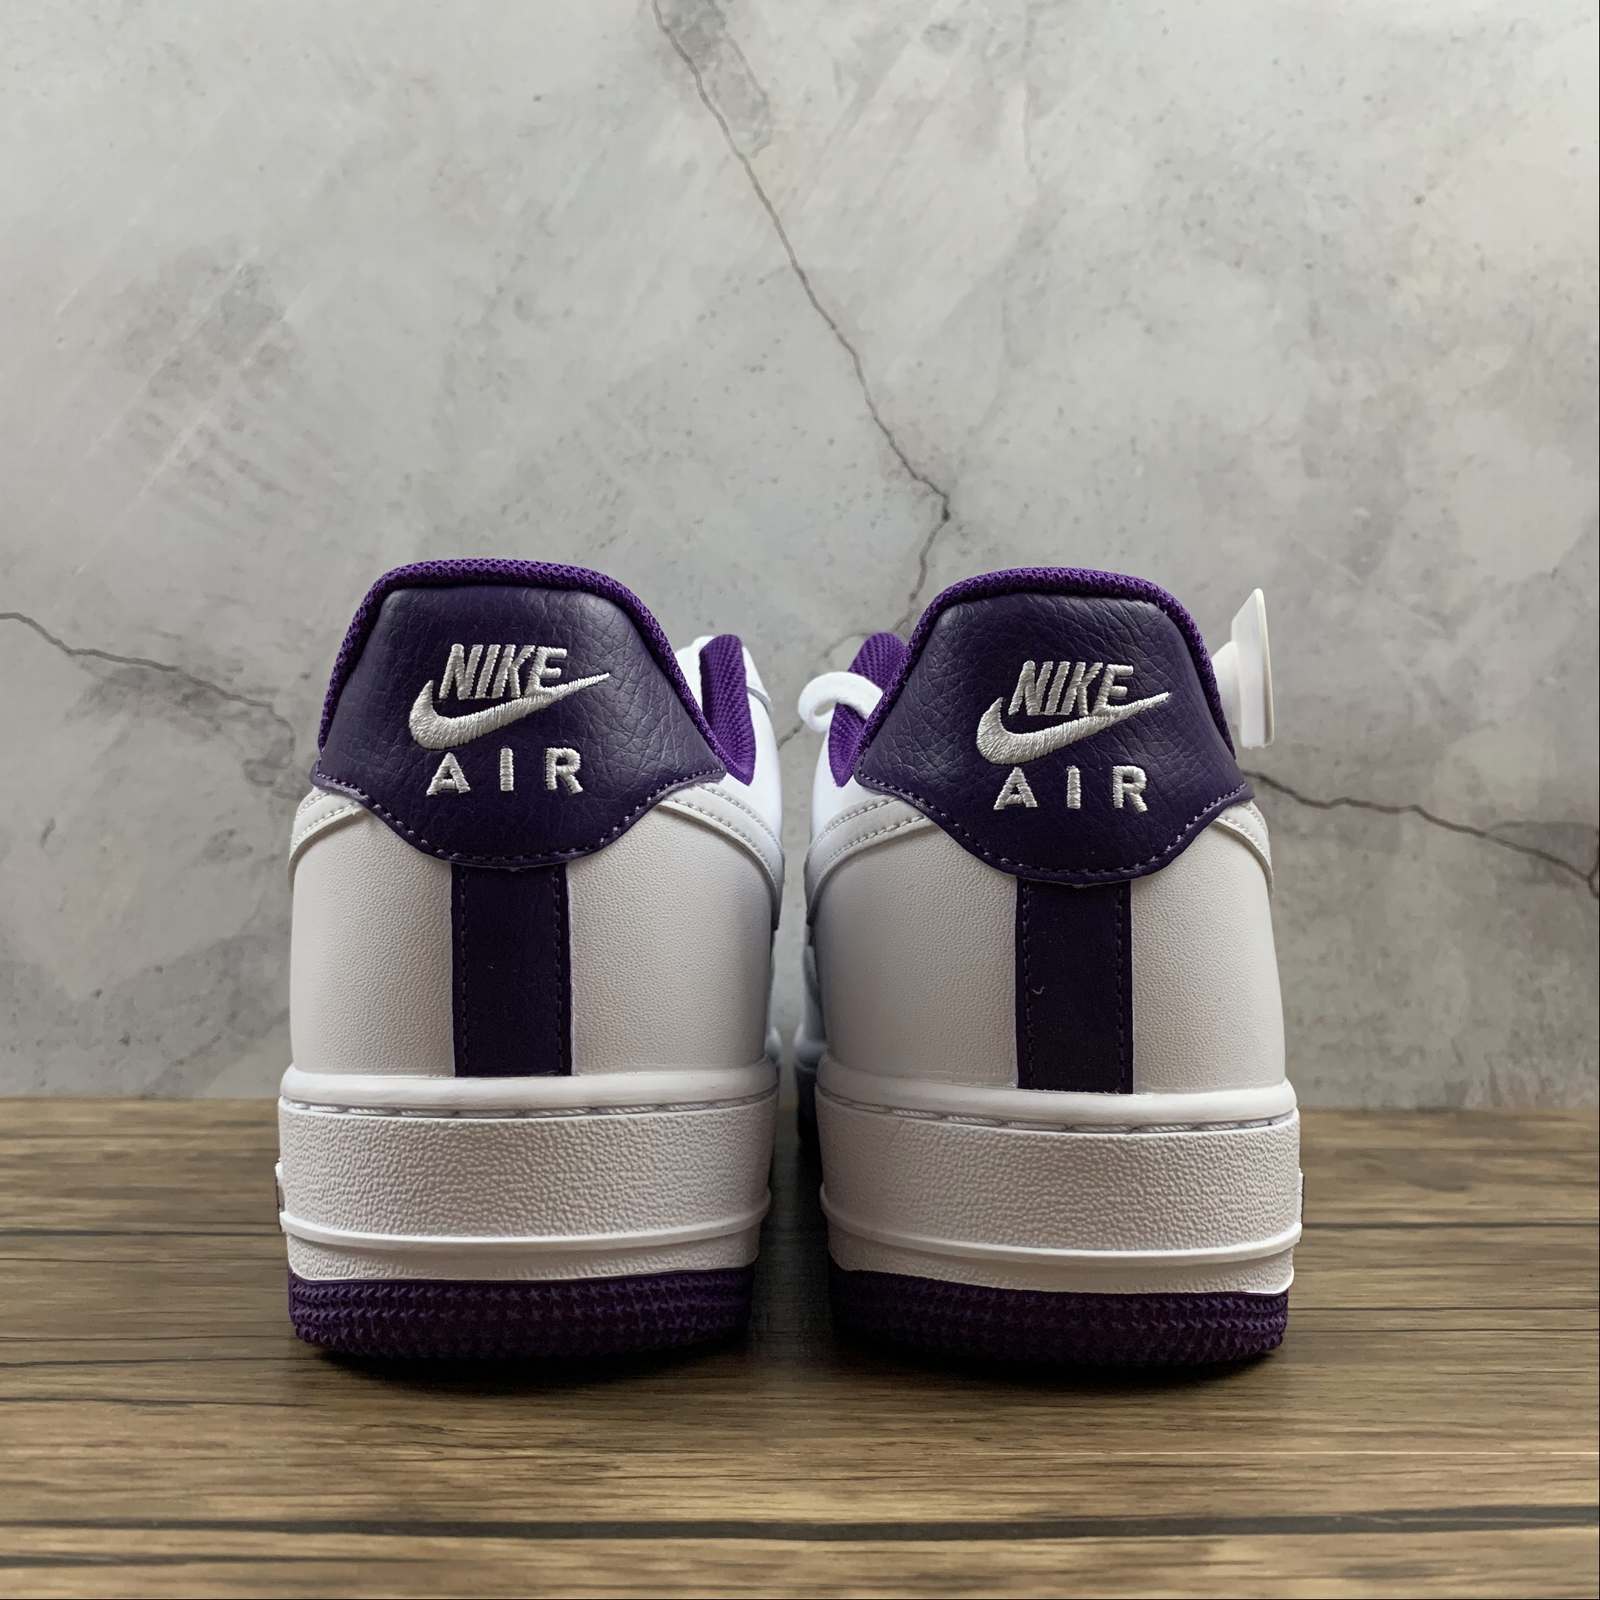 Air force 1 low purple white